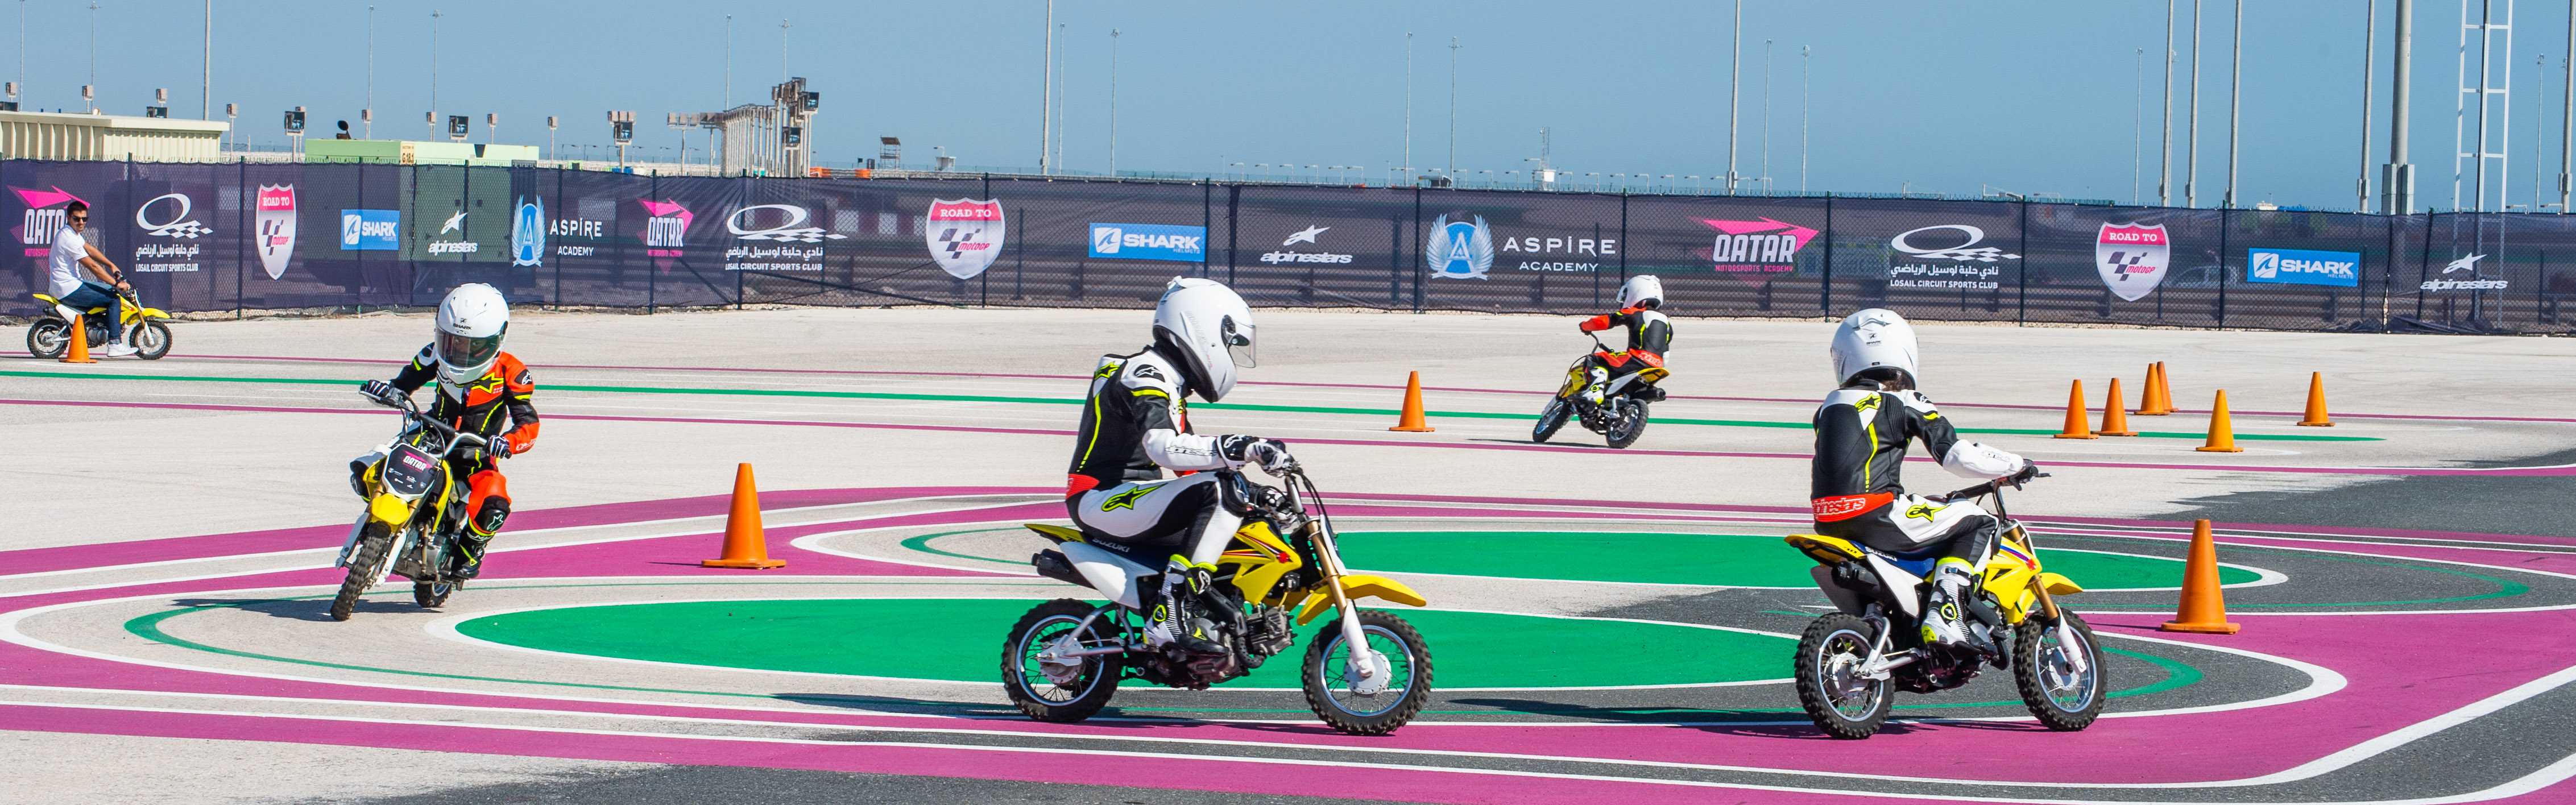 Qatar Motorsports Academy welcomes a new generation of young riders